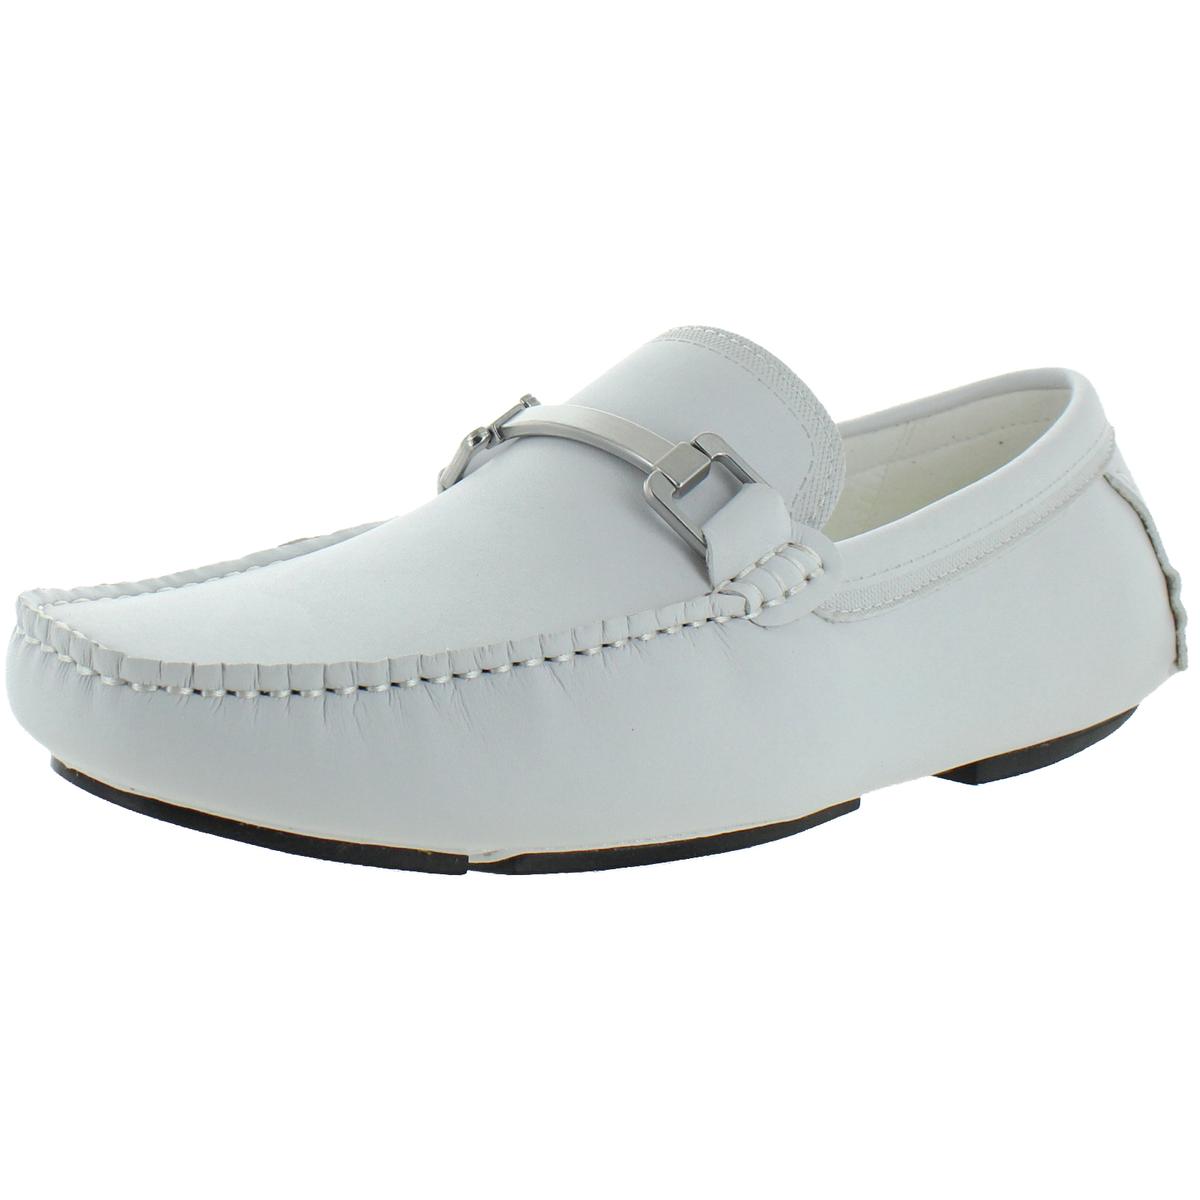 Kenneth Cole Reaction Mens Sound White Loafers Shoes 7.5 Medium (D ...